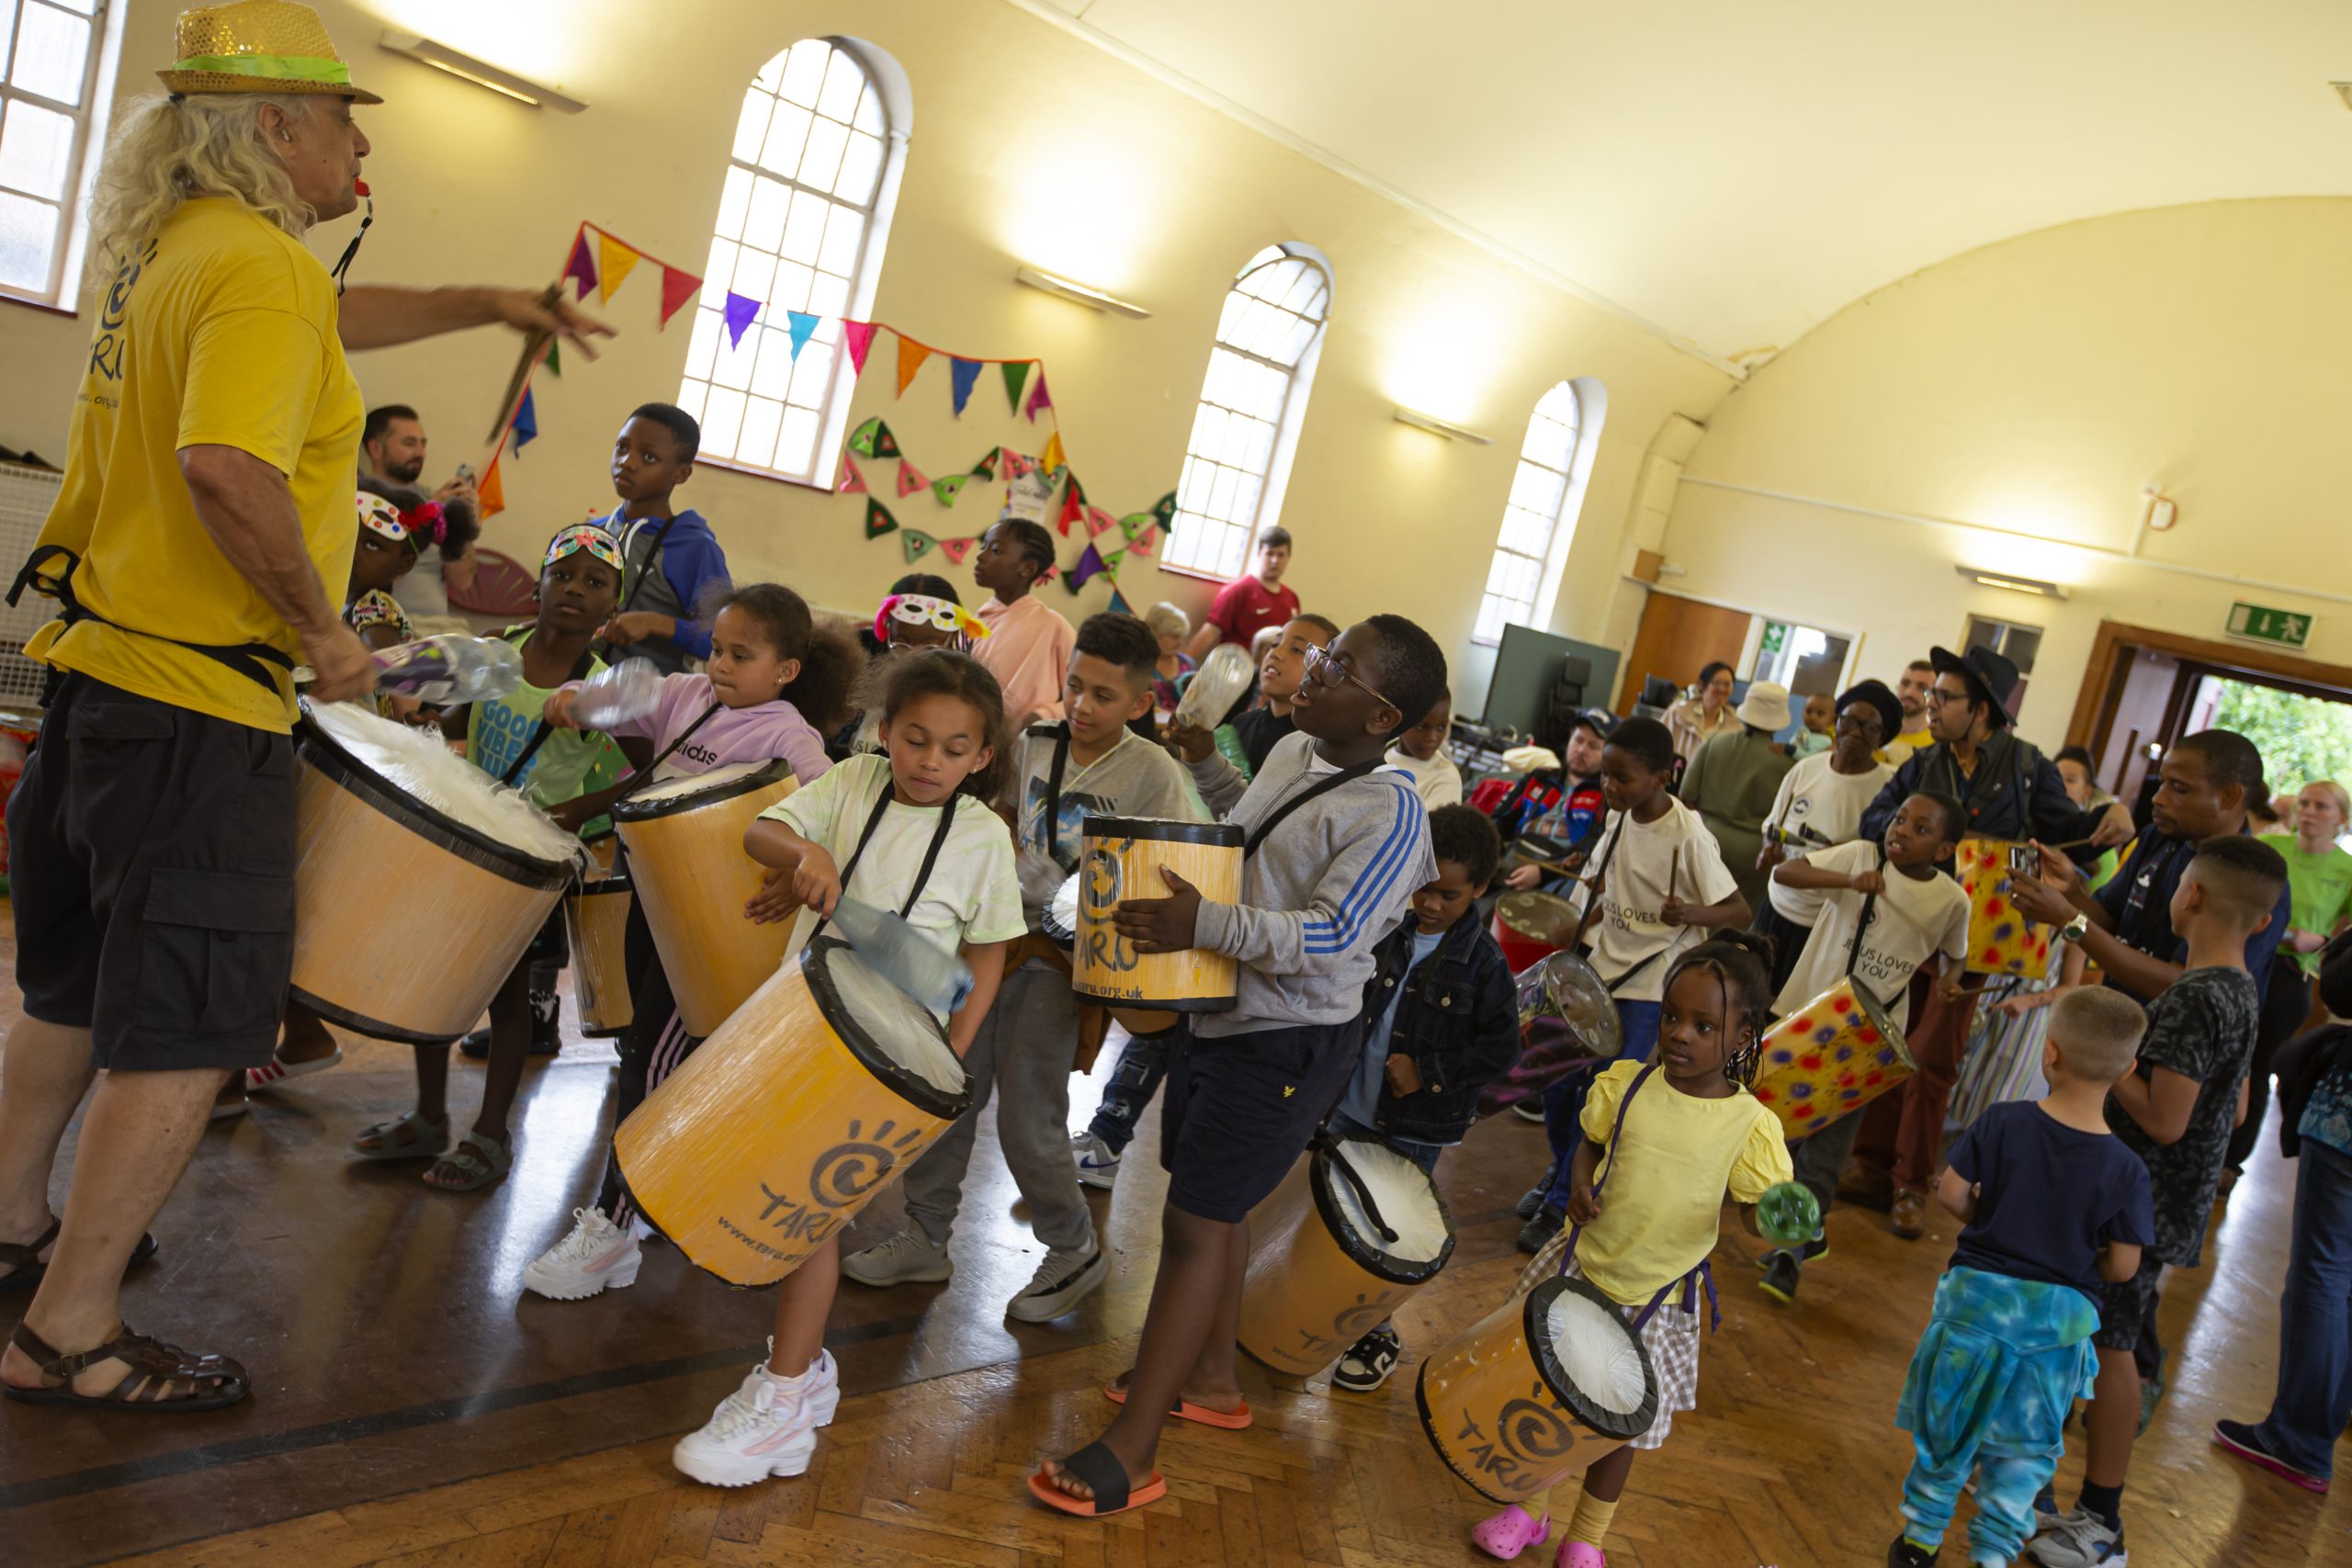 Remembering a glorious Summer in the Park. Children holding home made drums are getting ready to make a lot of noise!